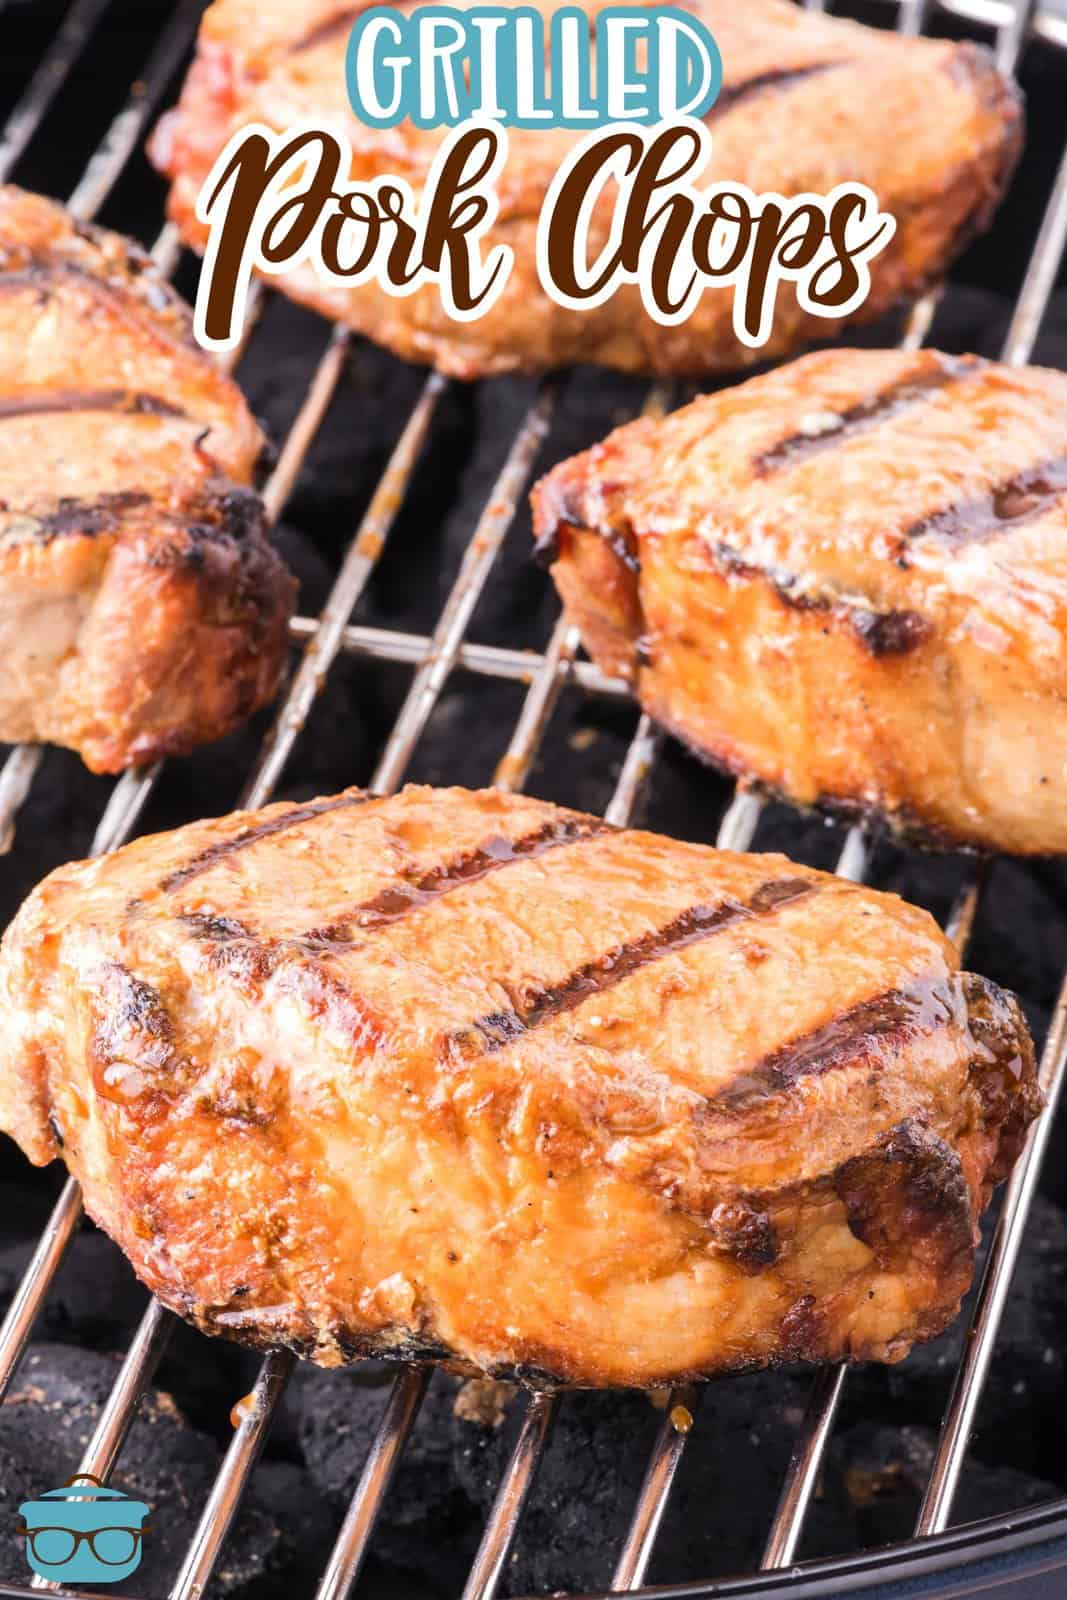 A grill grate with Grilled Pork Chops.